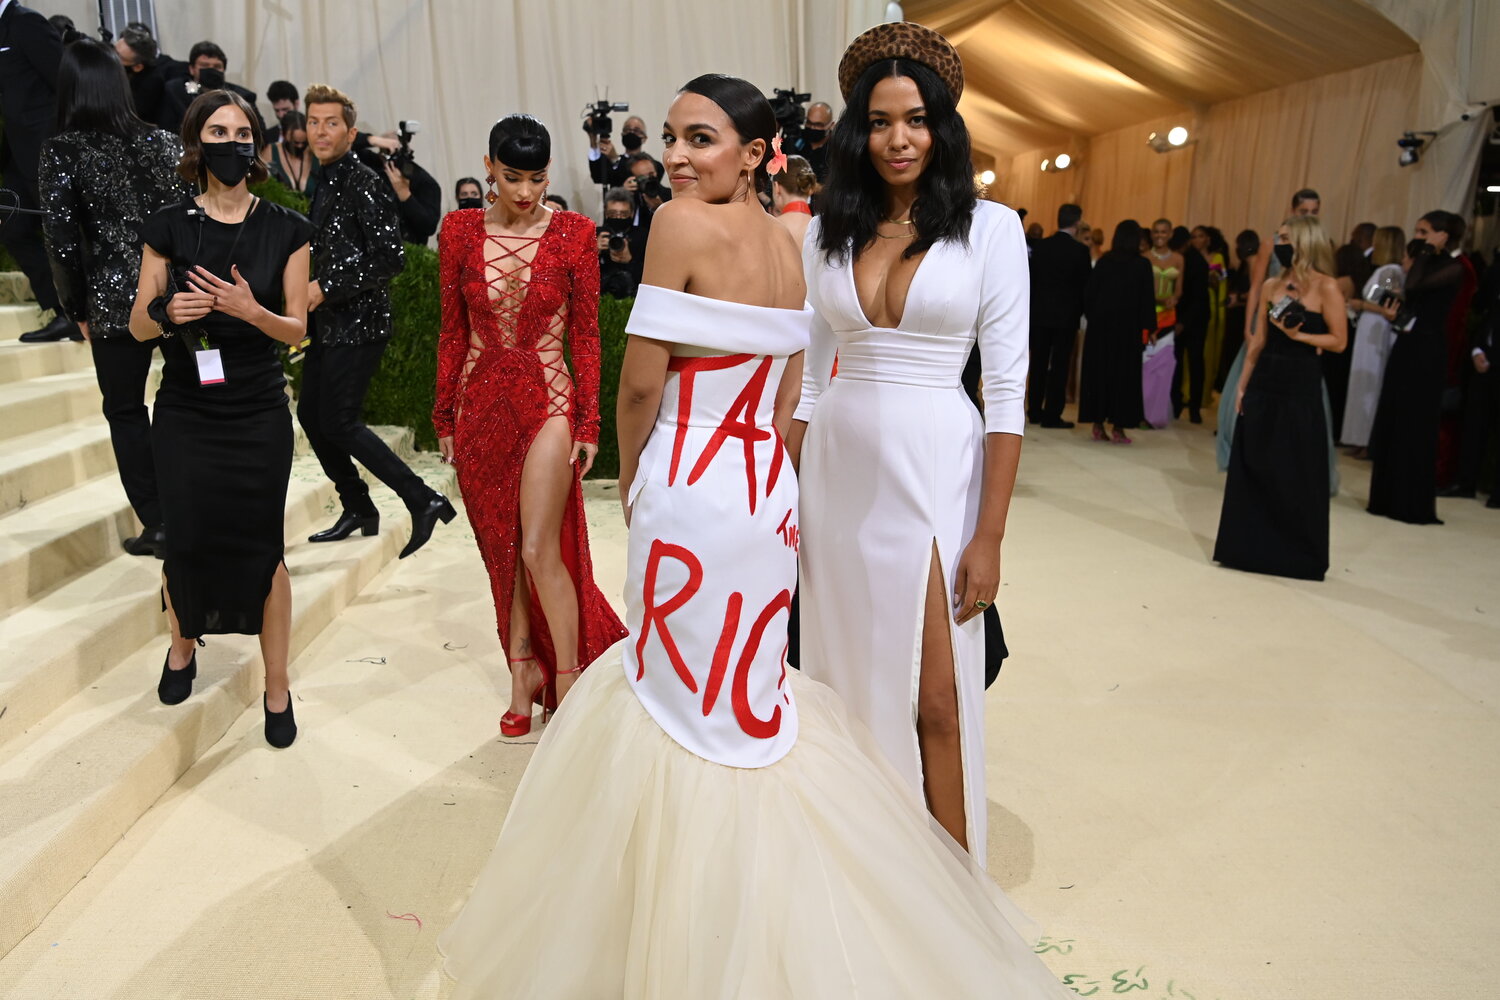 The 2021 Met Gala: Is the backlash warranted? – The Observer